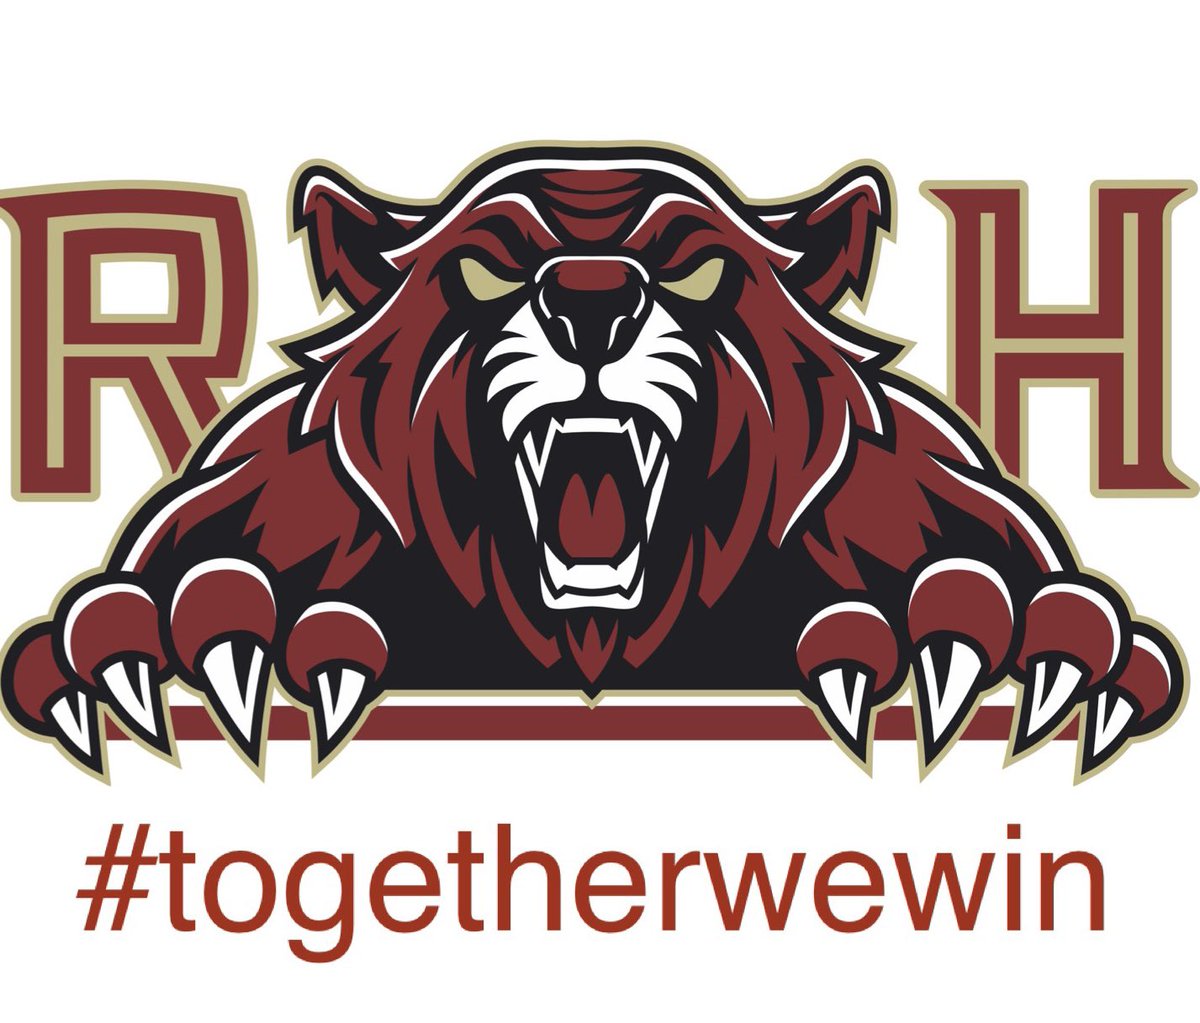 It’s Gamday, @RHHSGirlsBBall! Good Luck and may you bring home State Champions! Go Bearcats! 💪🏼🏀🐾 #togetherwewin